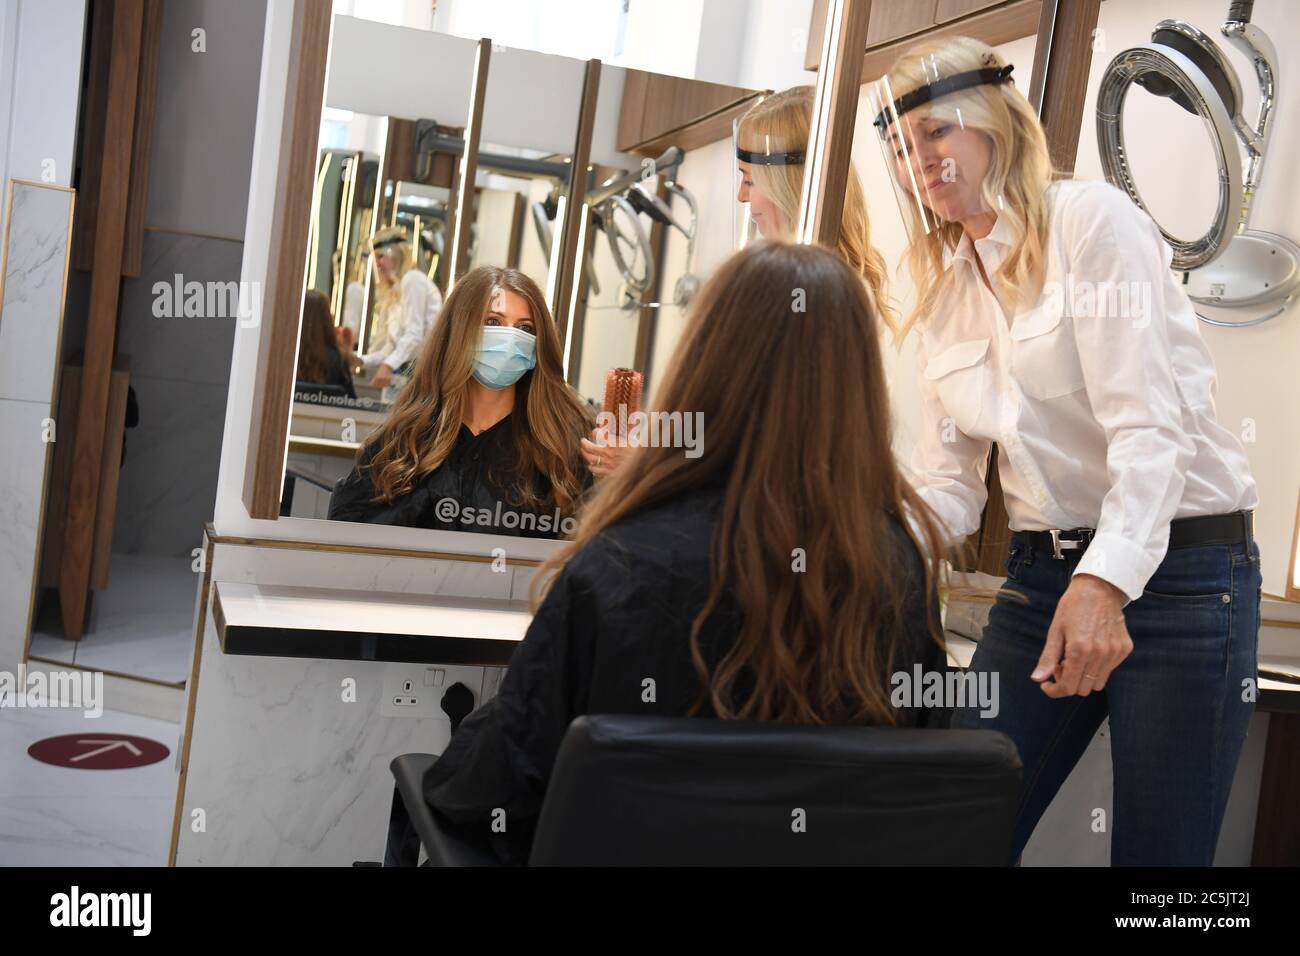 Co-founder Belle Cannon practises on a mock client at Salon Sloane in Chelsea, London, as they prepare to reopen to the public on Saturday, when the lifting of further lockdown restrictions in England comes into effect. Stock Photo